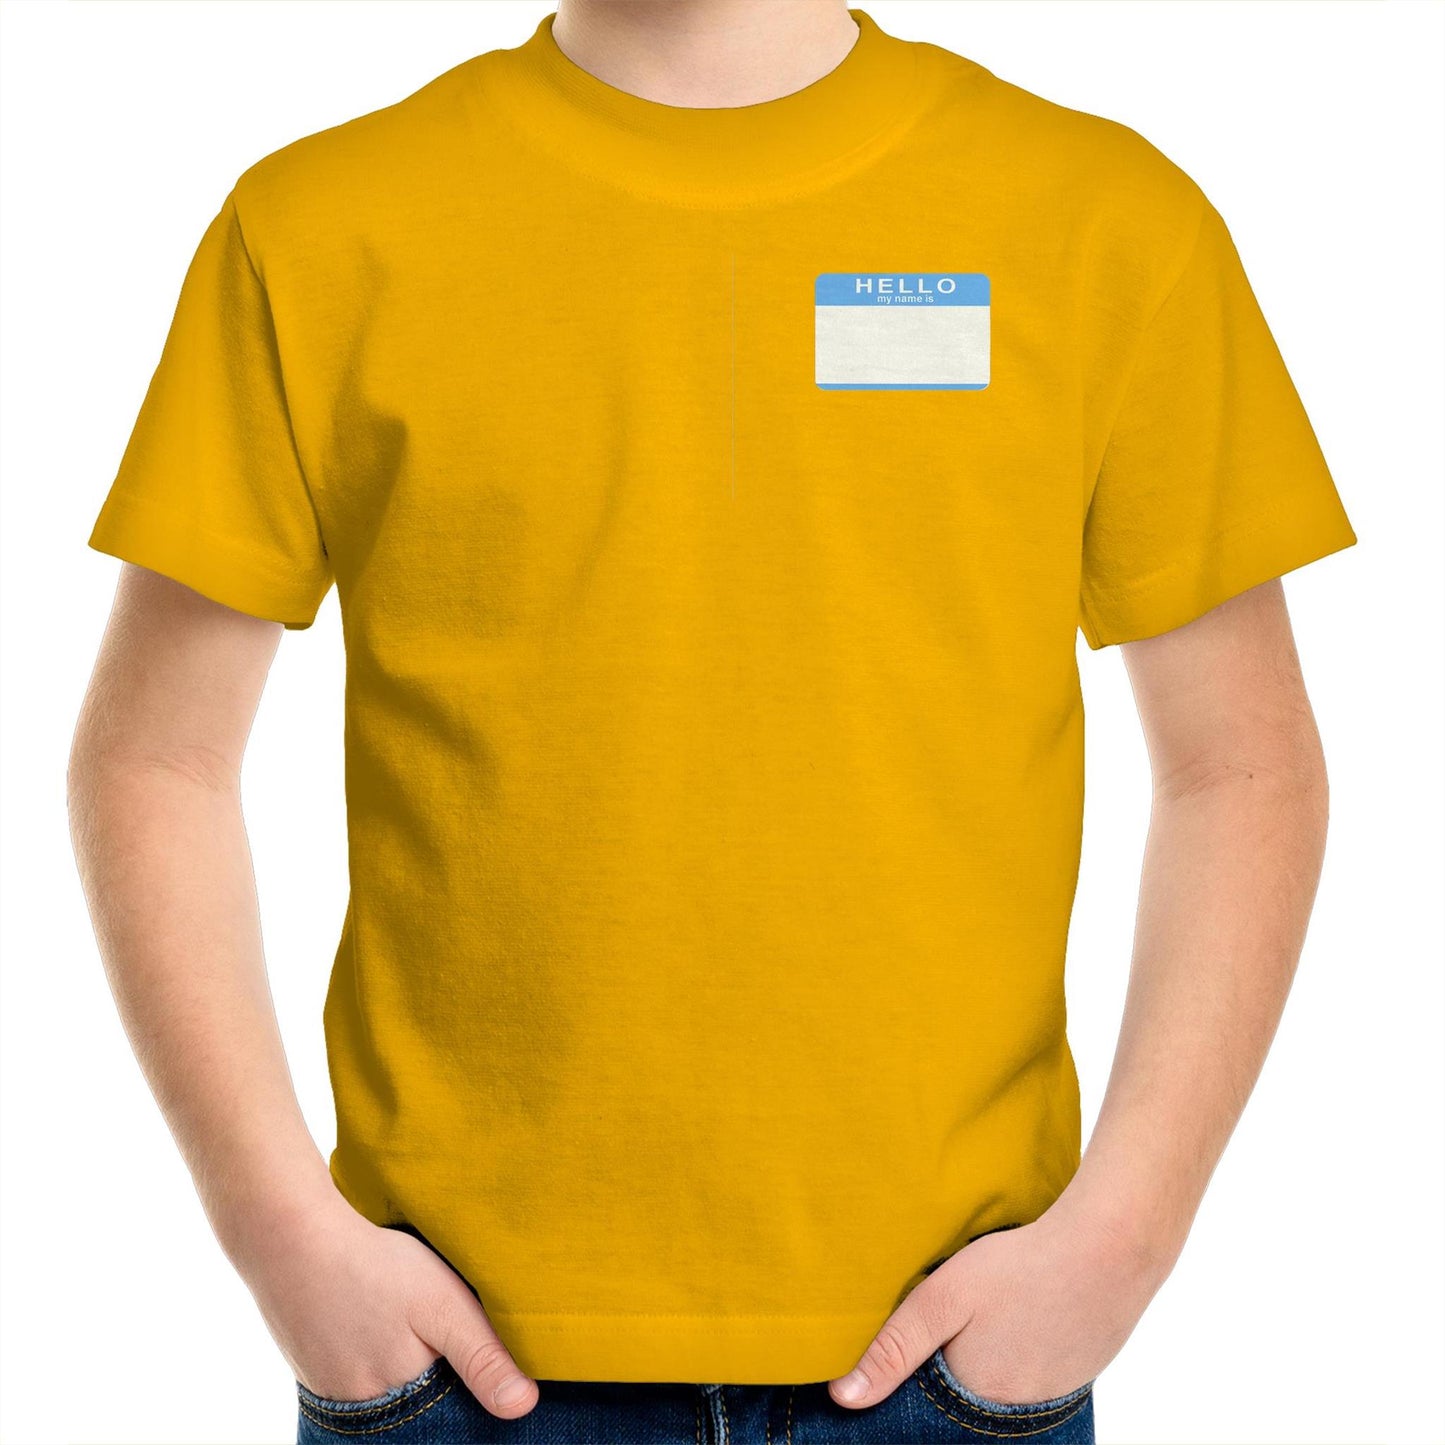 Name Badge T Shirts for Kids